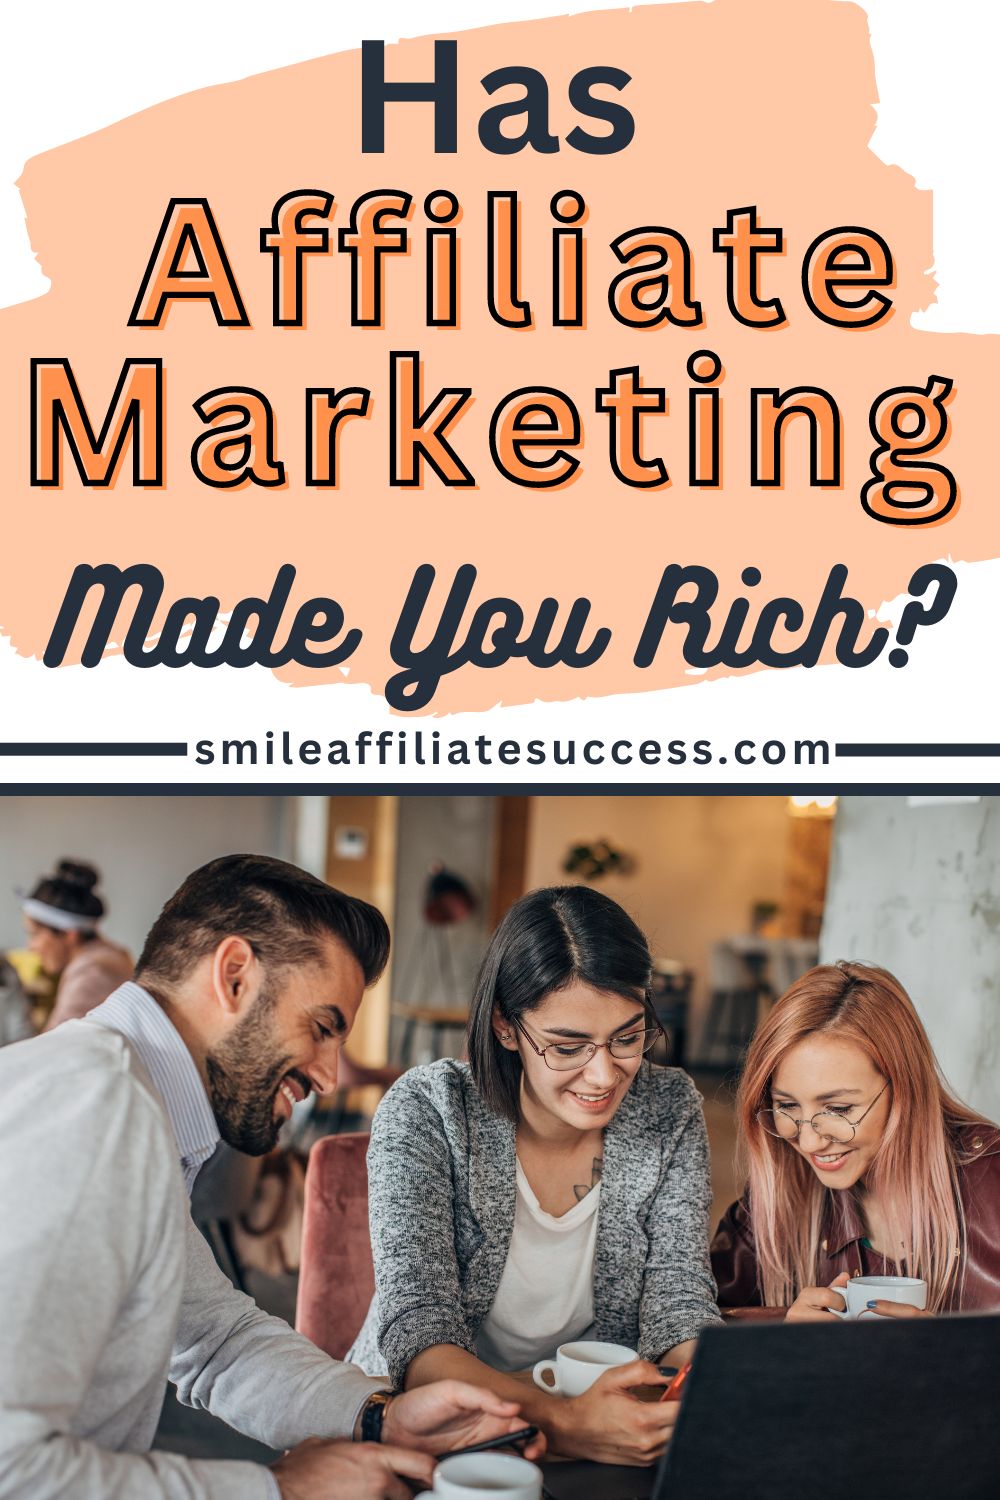 Has Affiliate Marketing Made You Rich?